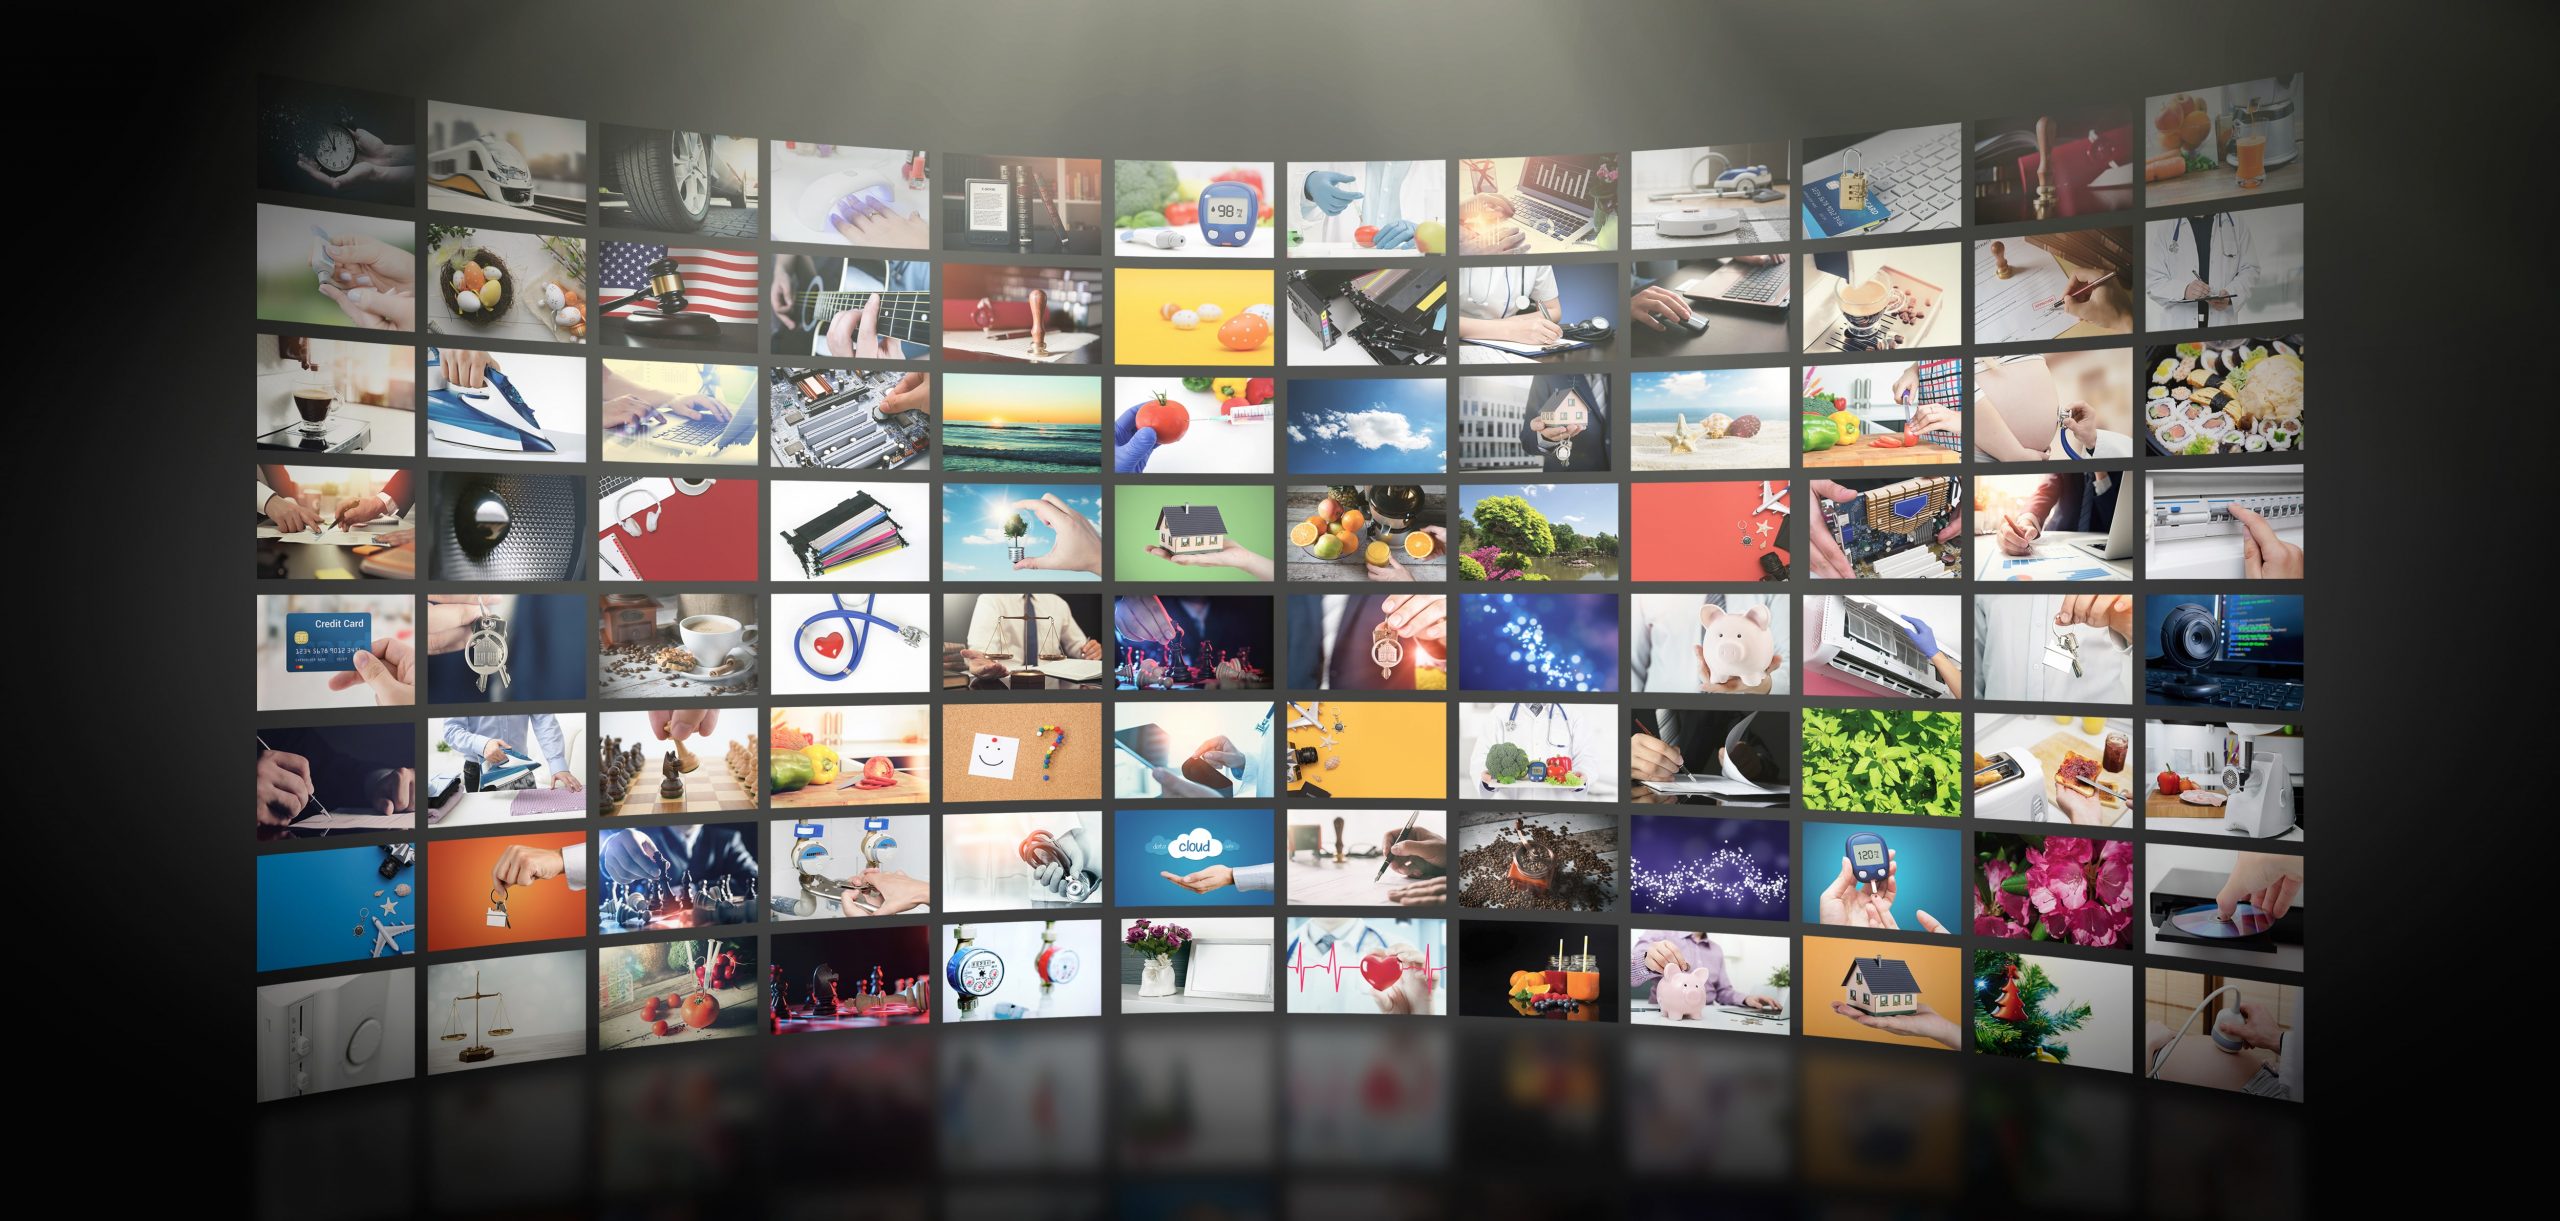 5 Reasons to Utilize Video Content Marketing for Businesses